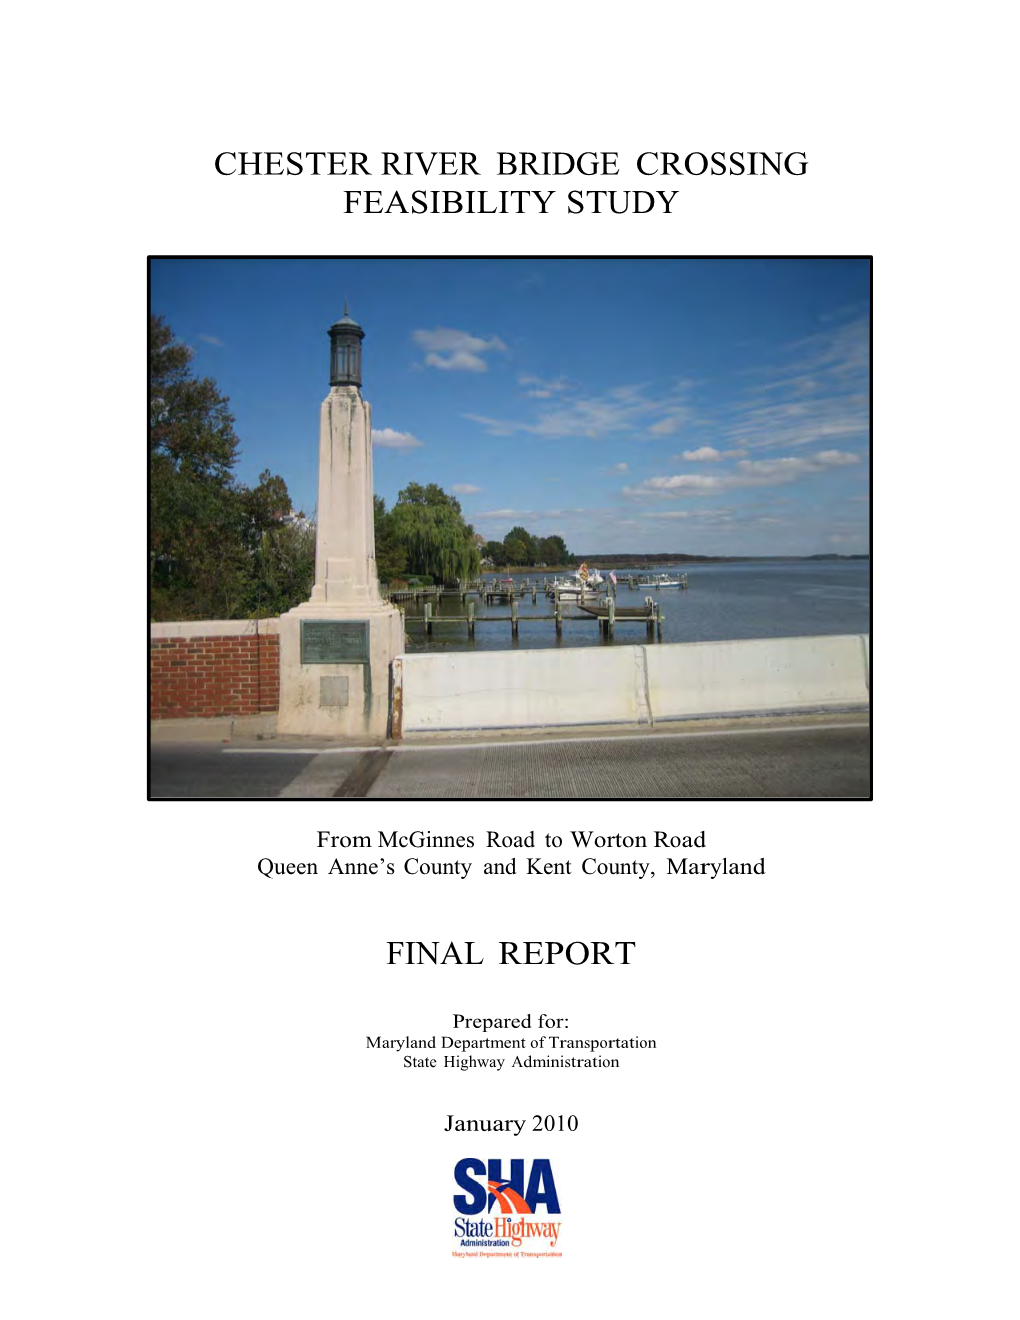 Chester River Feasibility